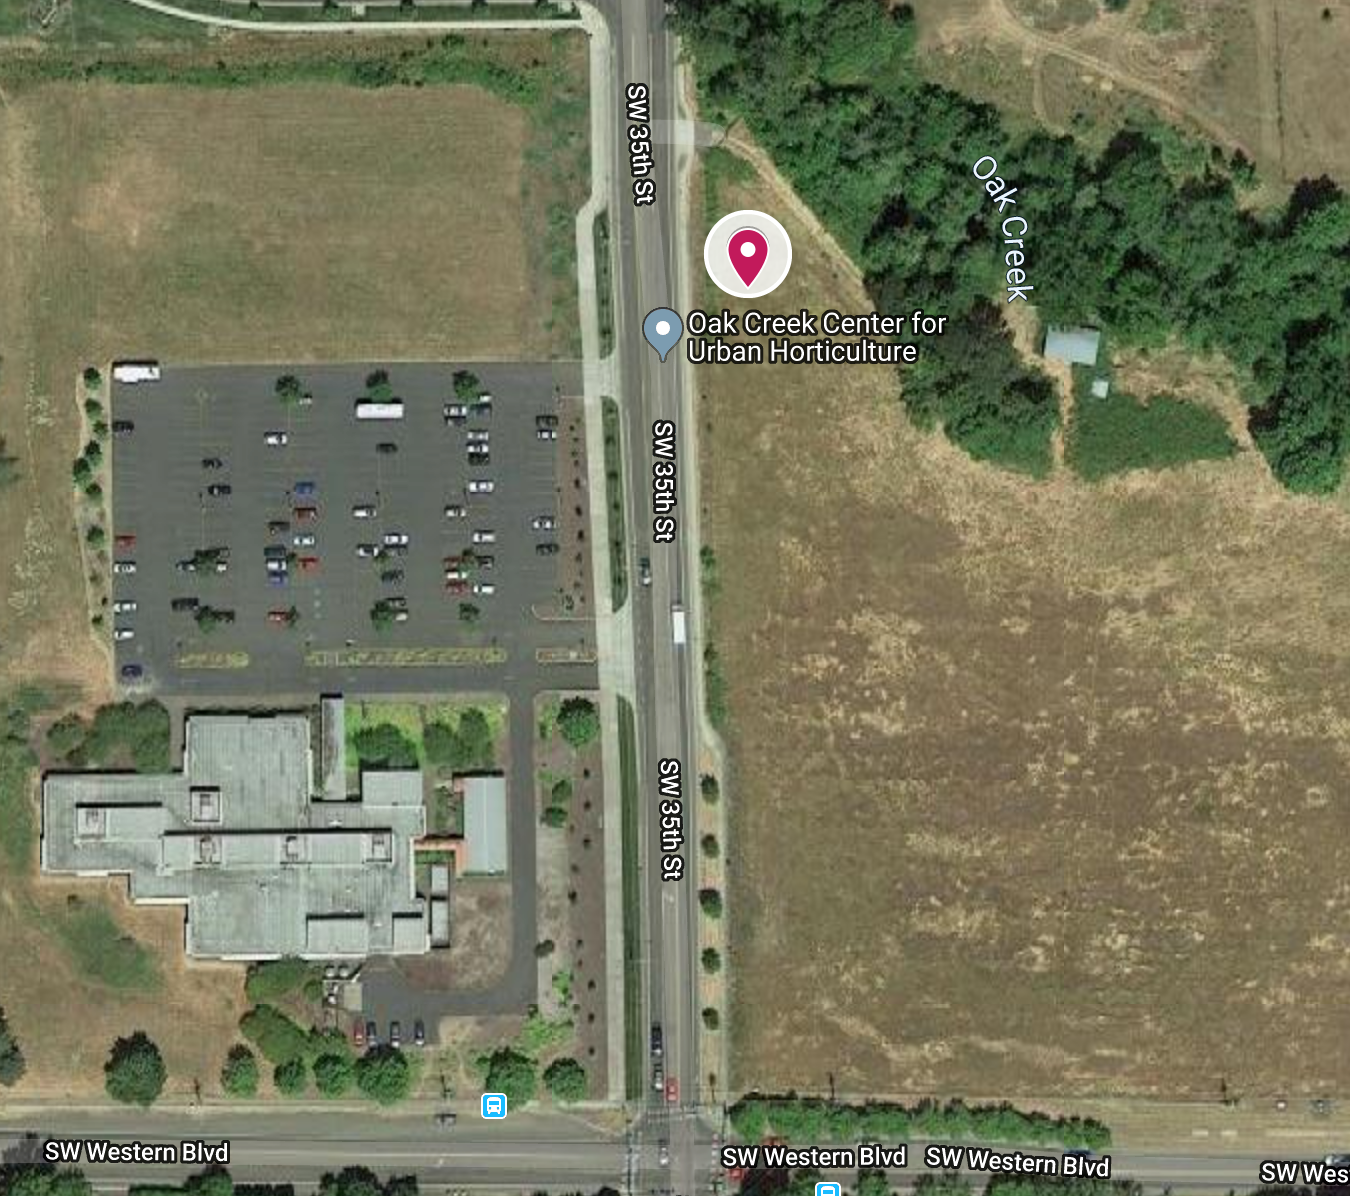 map of Corvallis site